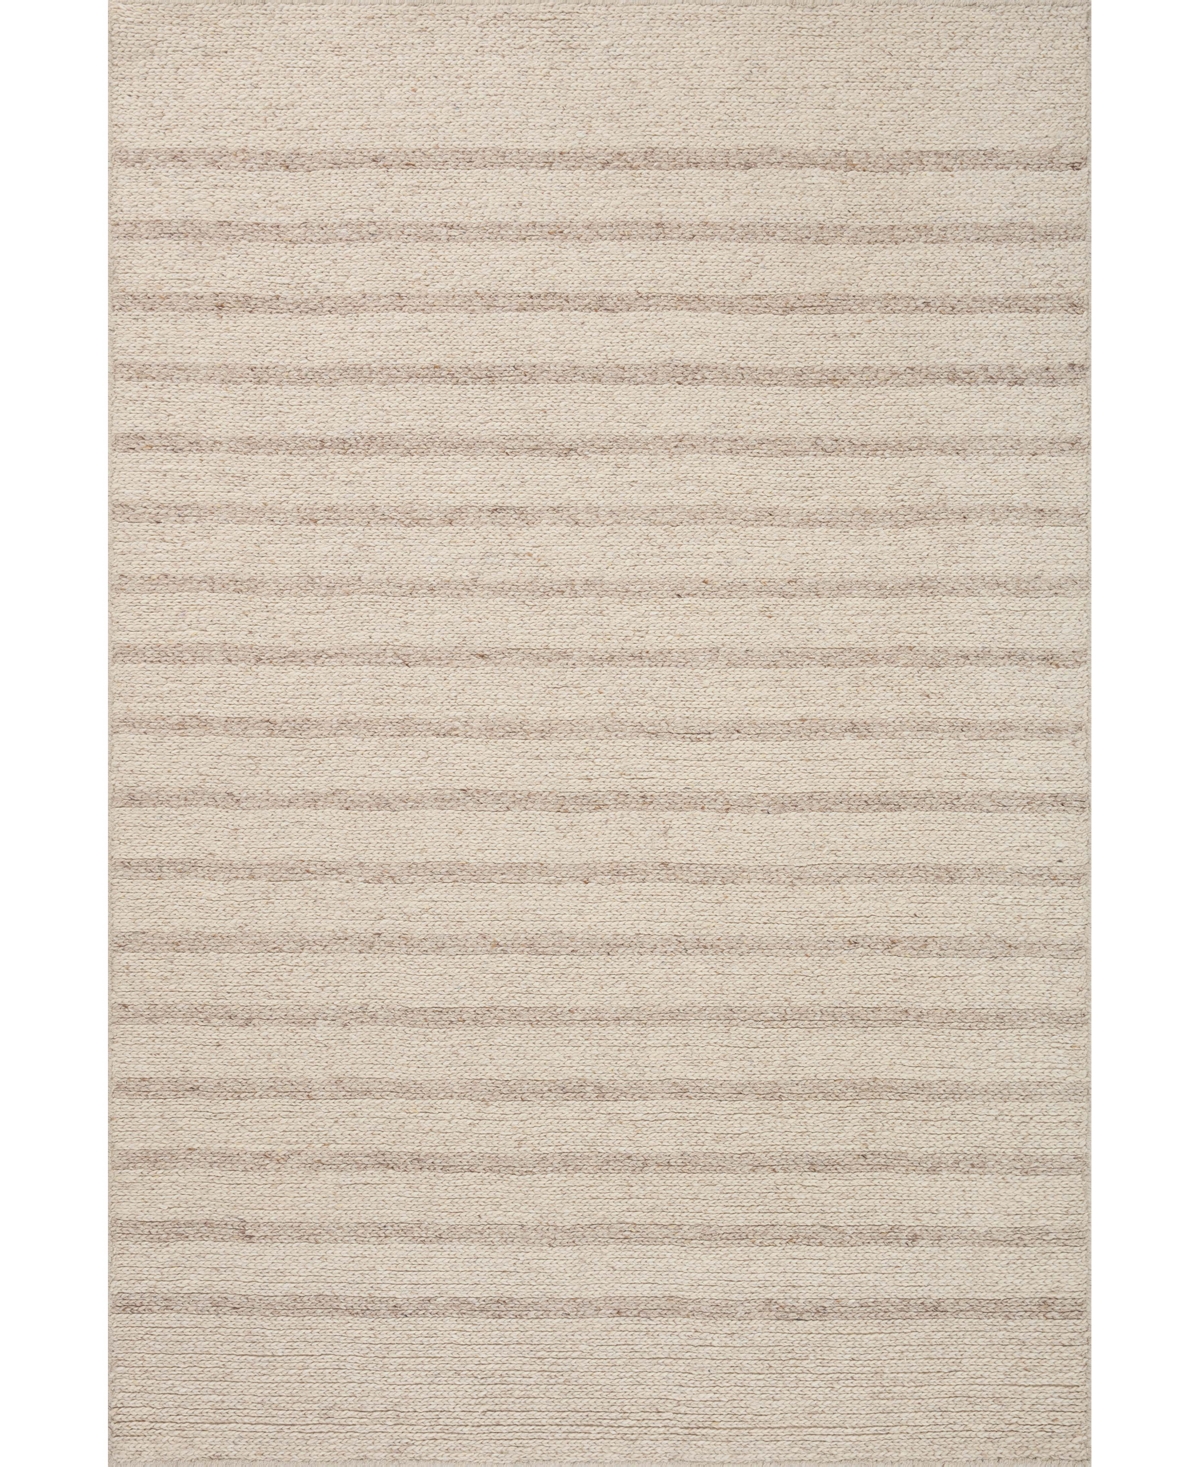 Magnolia Home By Joanna Gaines X Loloi Ashby Ash-01 3'6" X 5'6" Area Rug In Oatmeal